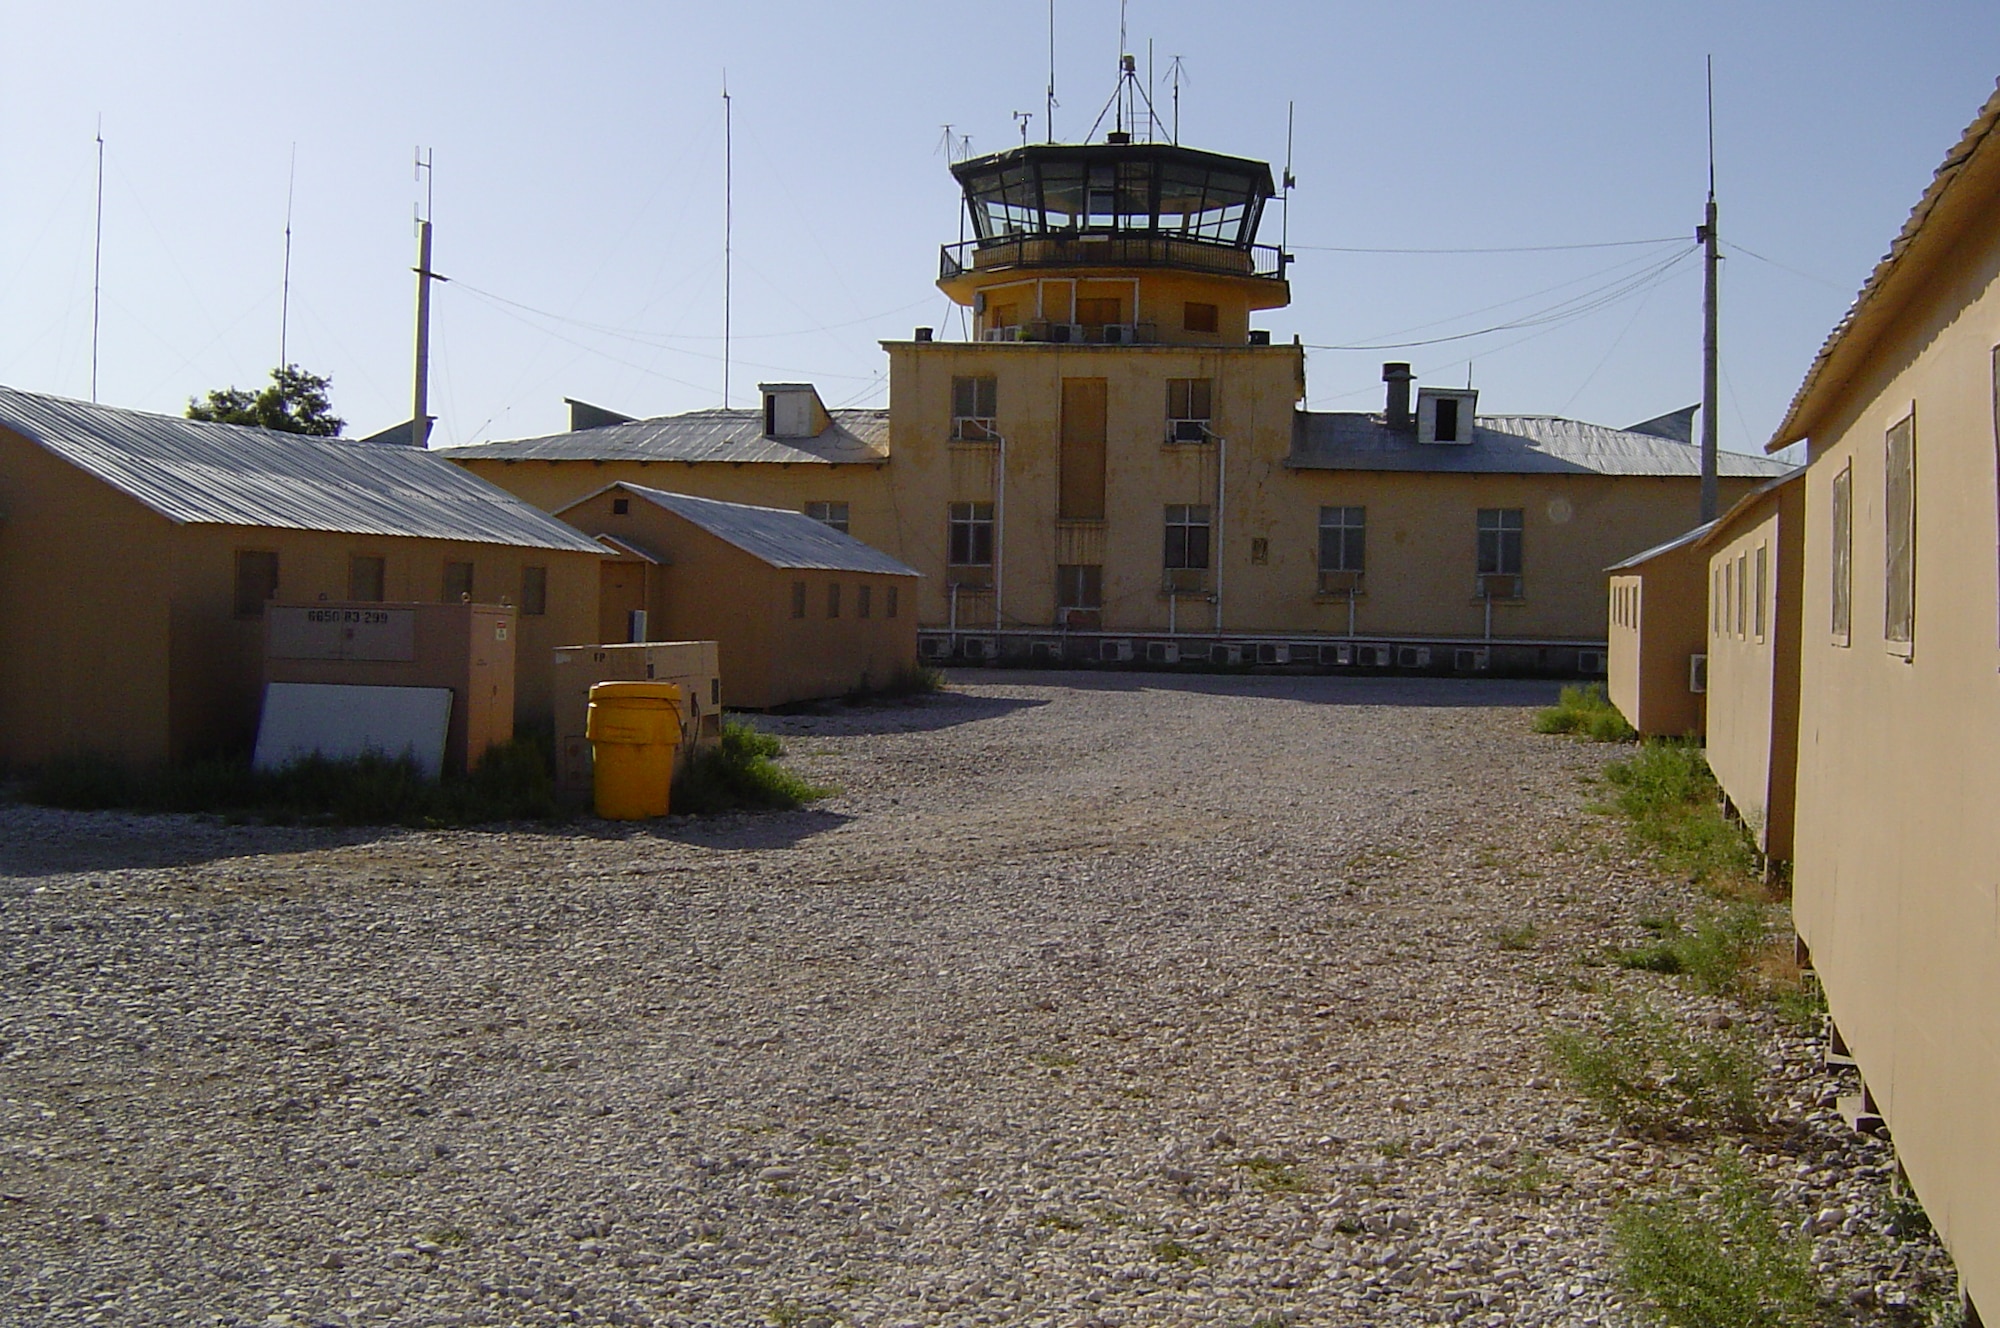 The old Russian control tower as it appeared from the back during August 2002. The tower, which is a familiar landmark to deployed service members and civilians who have worked here, was built on Bagram Airfield in 1976 during the Soviet Union's economic collaboration with Afghanistan. (Courtesy photo)